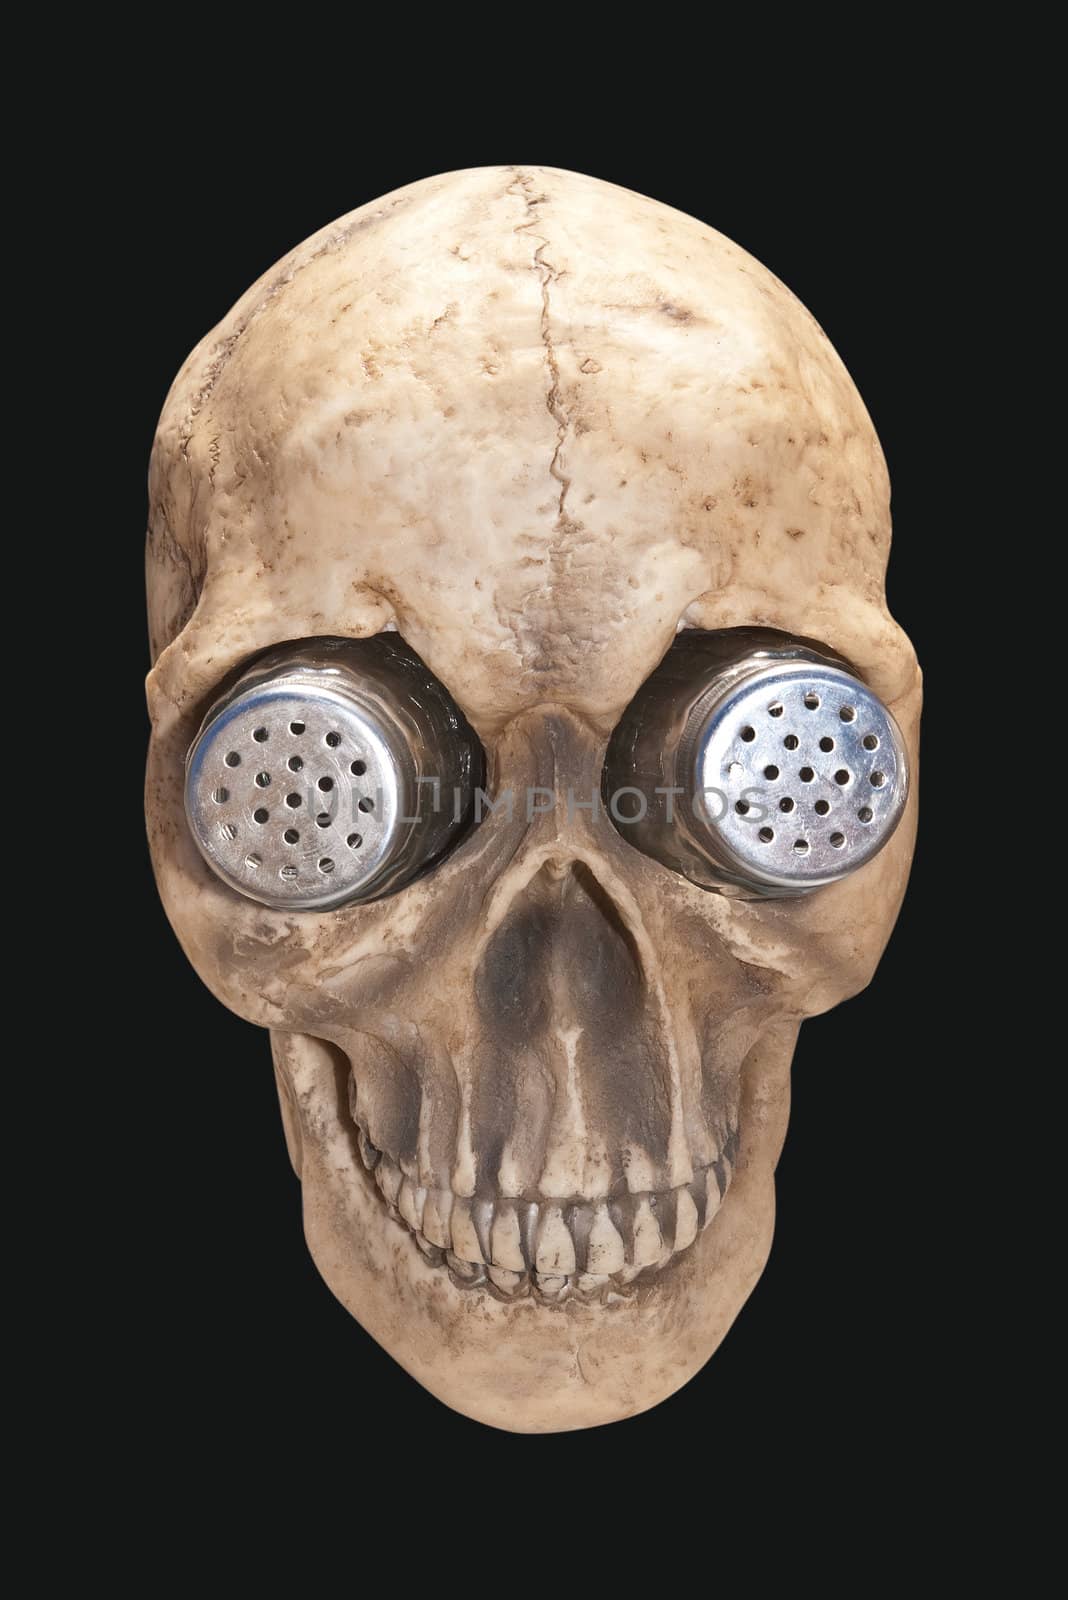 Salt and pepper shaker holder shaped like a human skull.  Isolated on black background, clipping path included.